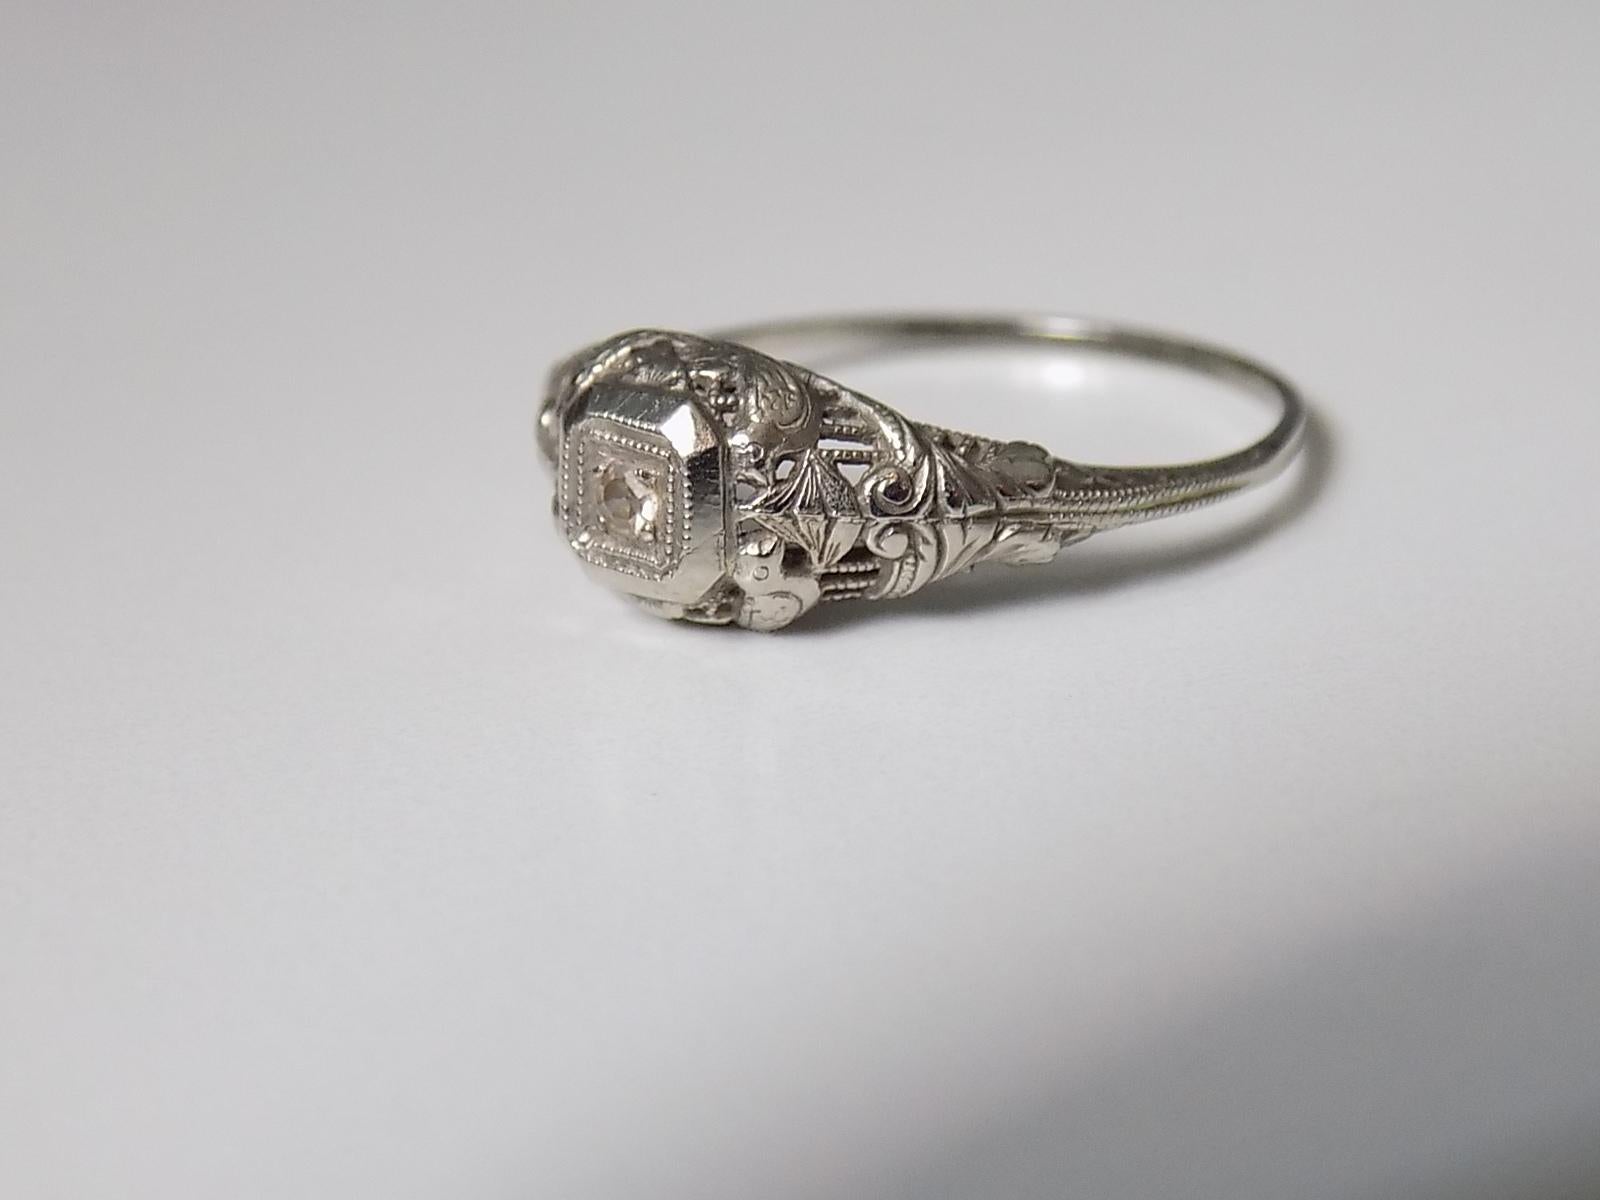 A Classic Art Deco 14 carat white Gold and Diamond solitaire ring in fancy setting. American origin.
Size O UK, 7.5 US.
Height of the face 7mm.
Weight 1.4gr.
Marked 14 for 14 Carat Gold